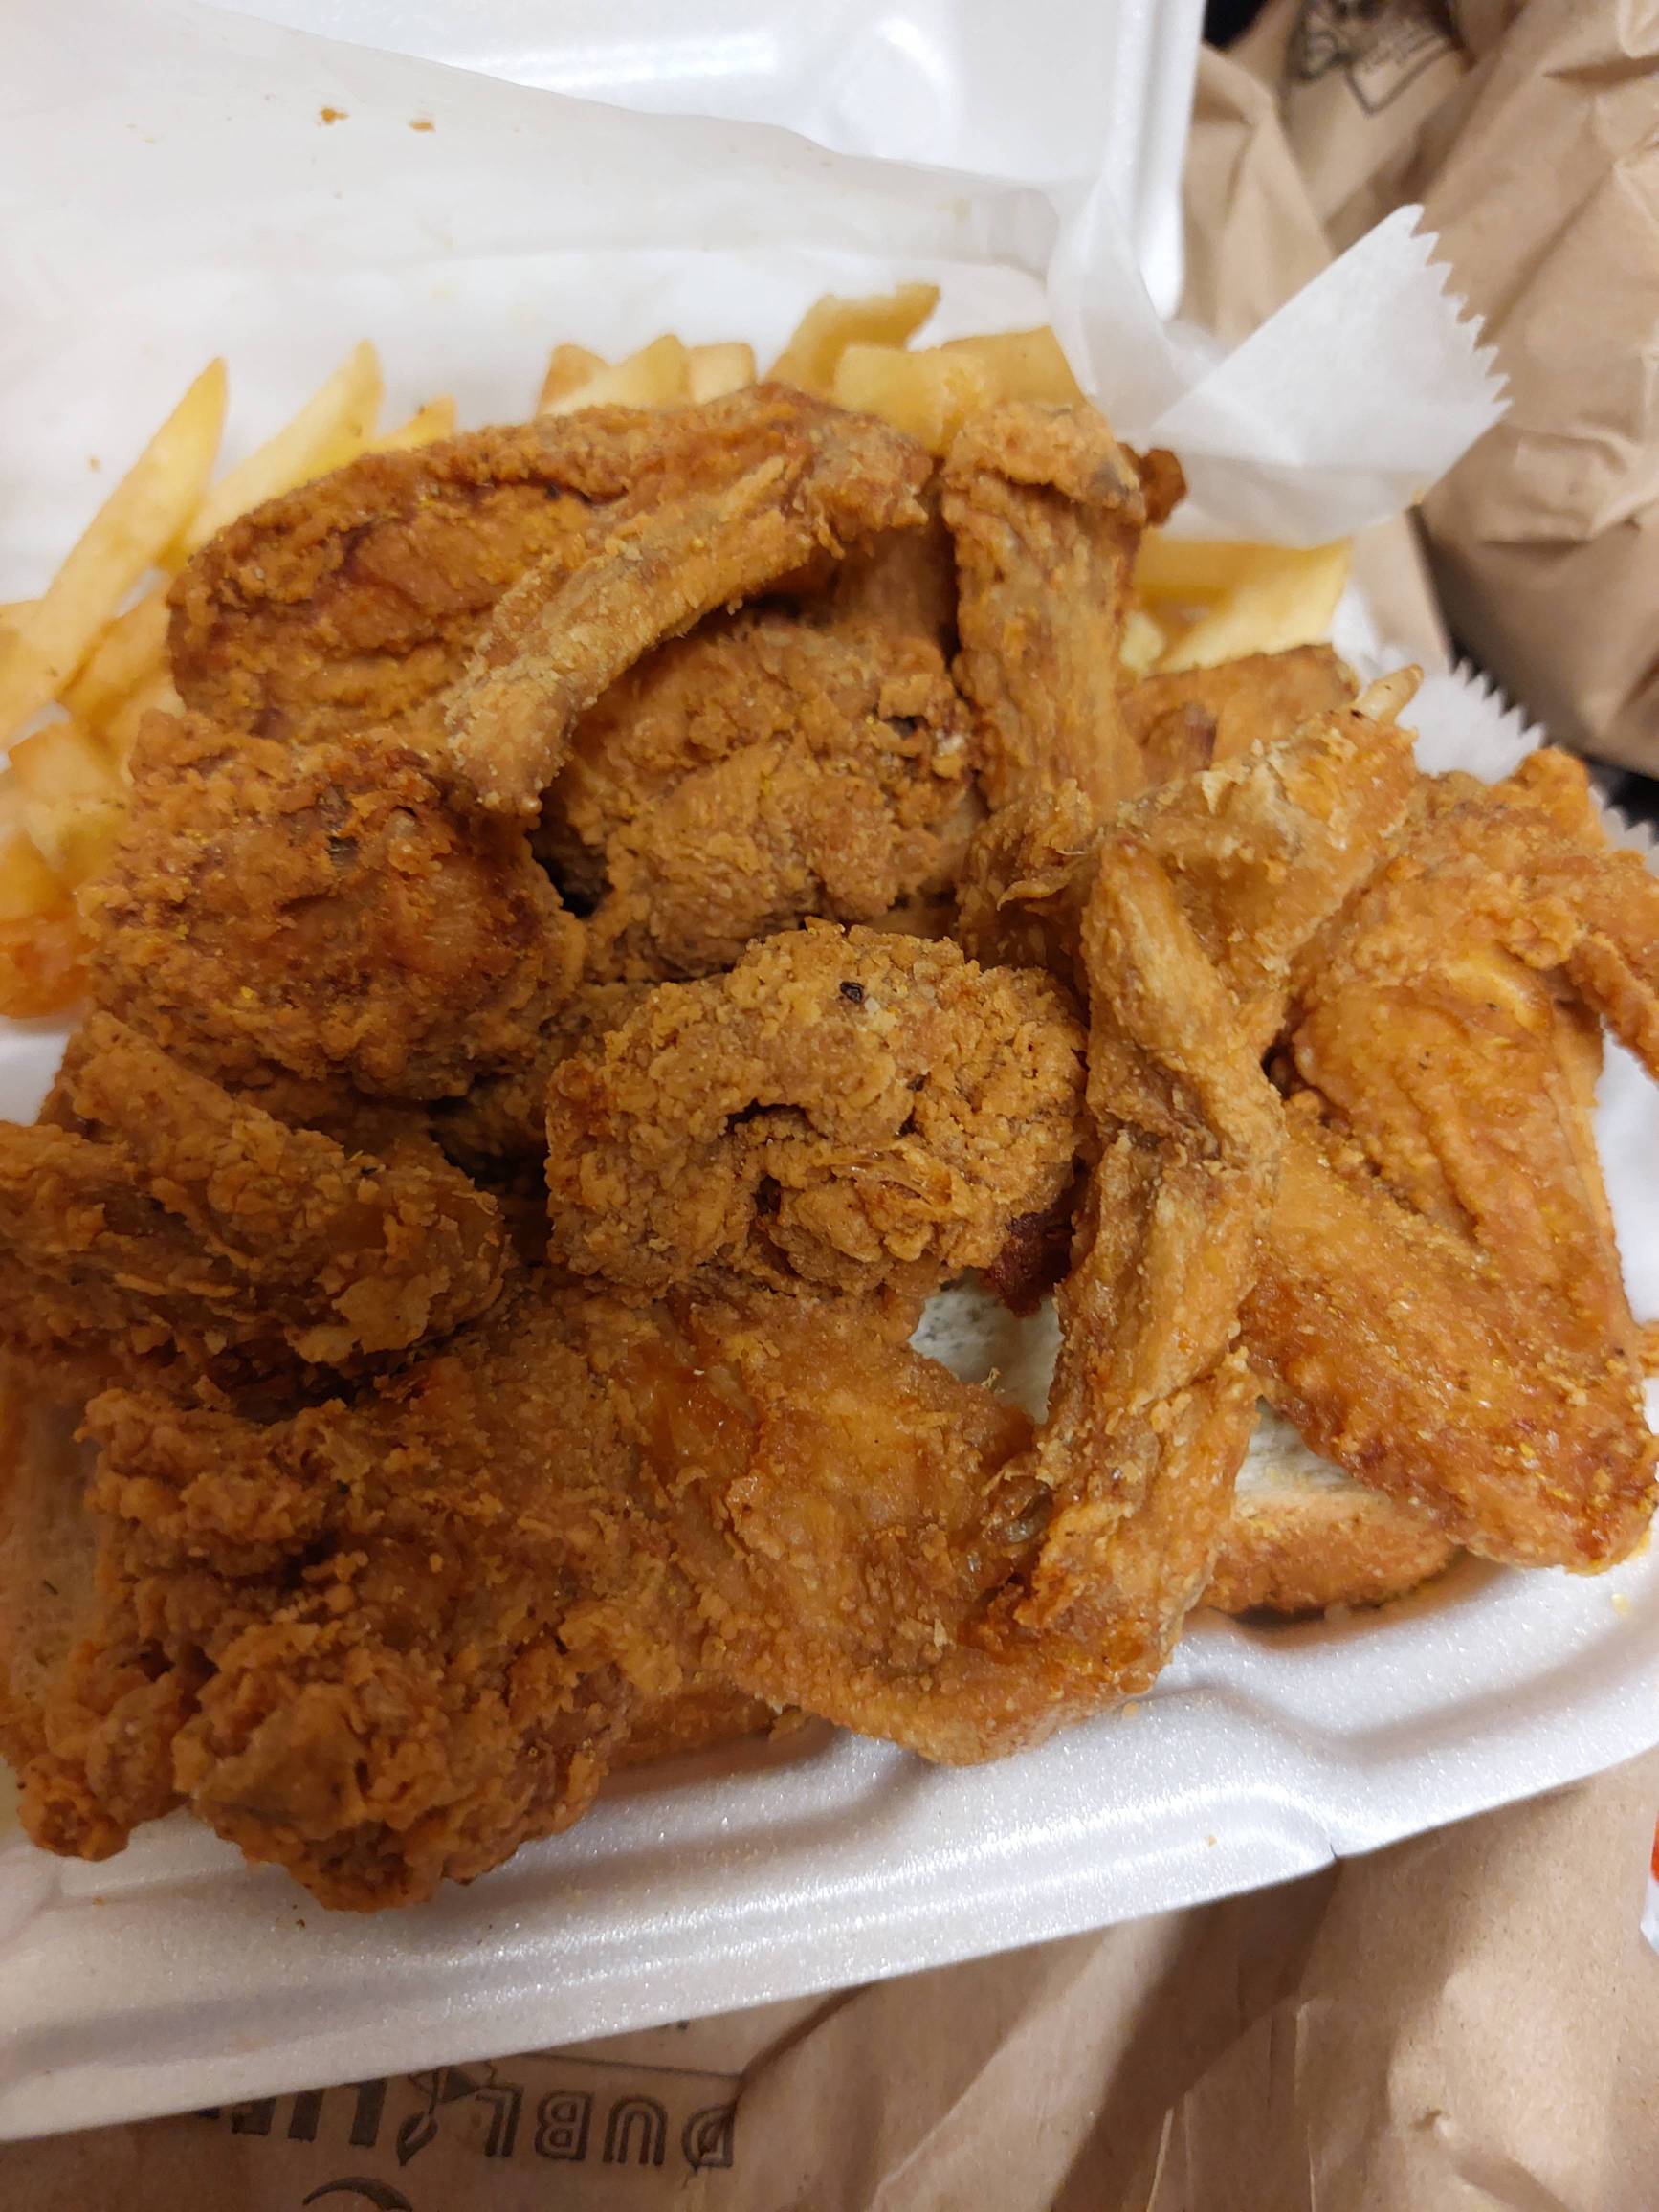 Order CAPTAIN HOOKS FISH AND CHICKEN - Katy, TX Menu Delivery [Menu &  Prices]